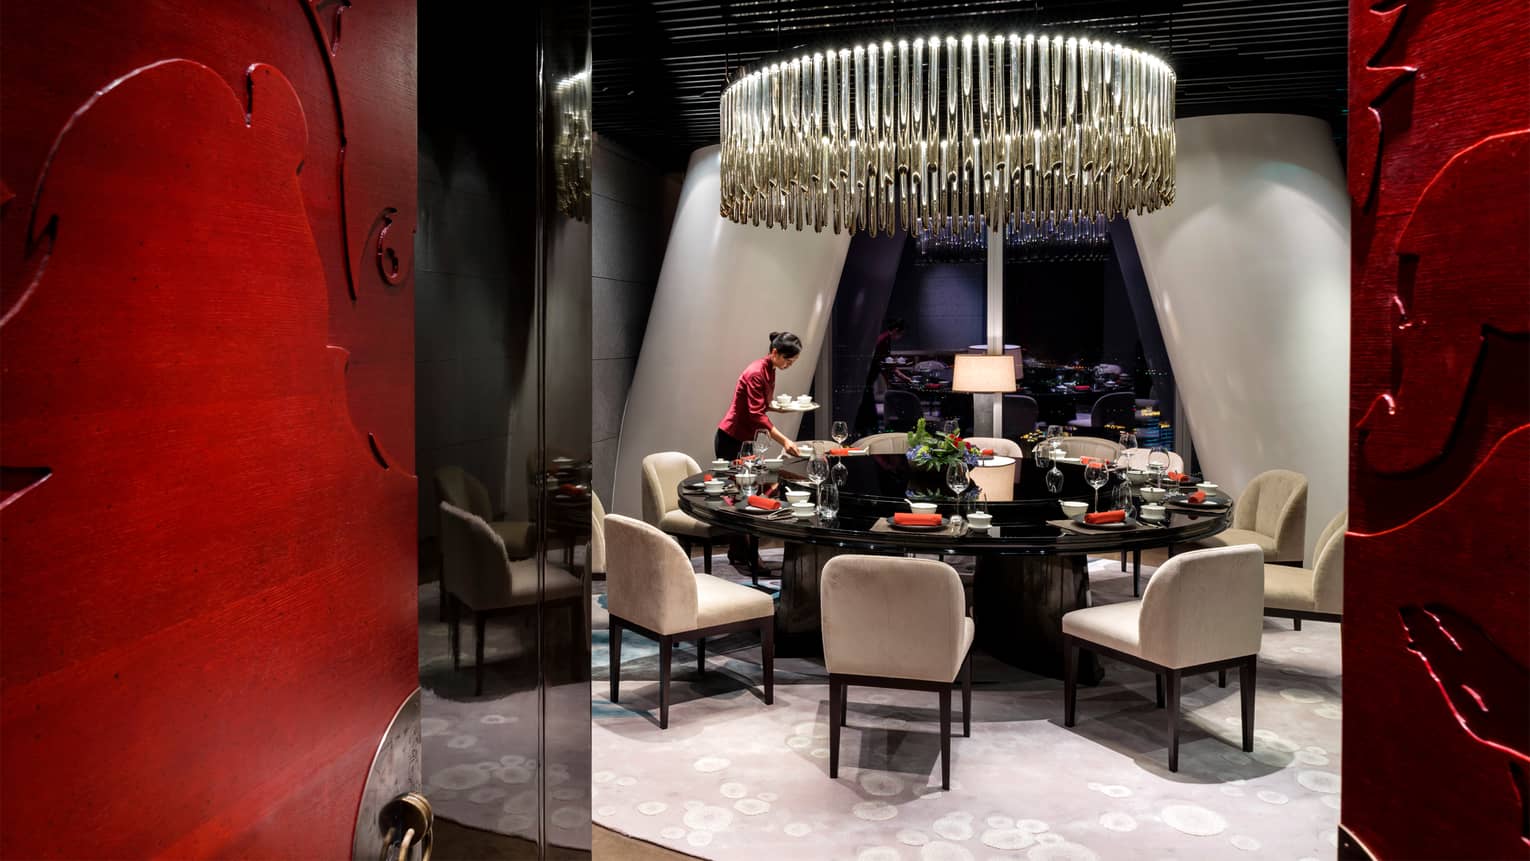 Yu Yue Heen server in red shirt sets round formal private dining table under large chandelier 